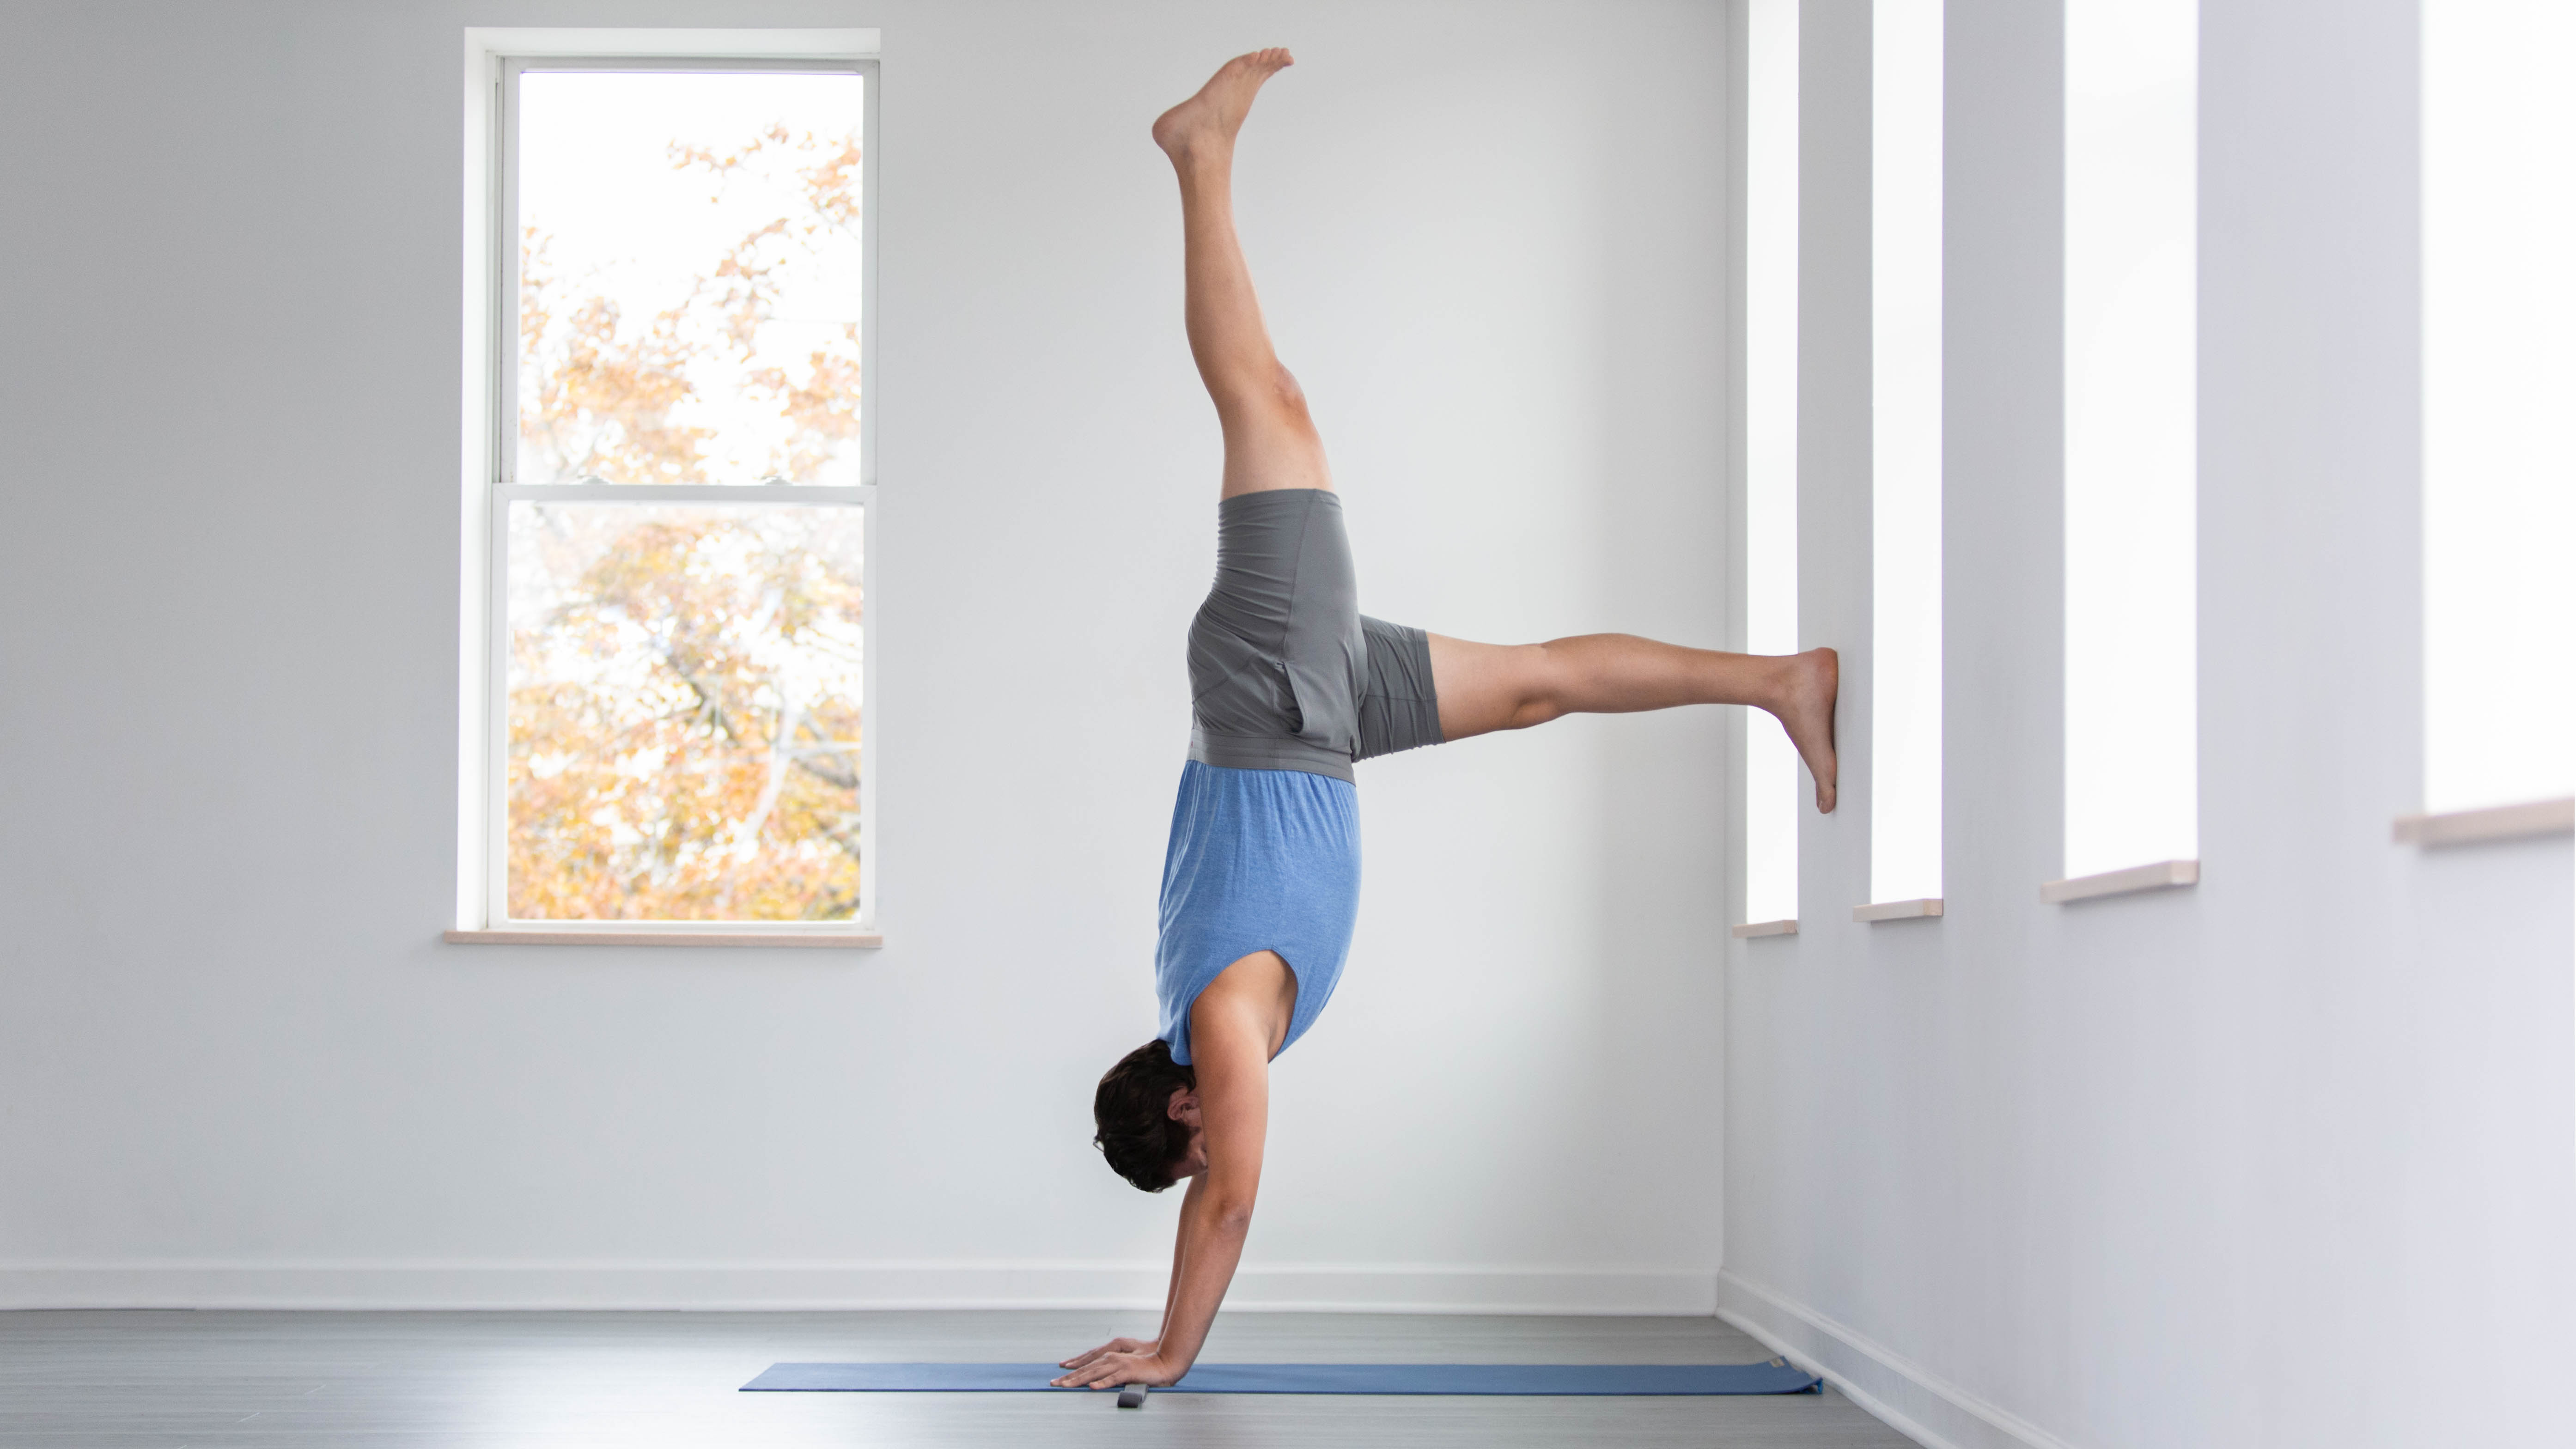 Take advantage of the support and alignment from the wall to deepen your  poses and stretching. Unlock your best poses, let the wall be y... |  Instagram